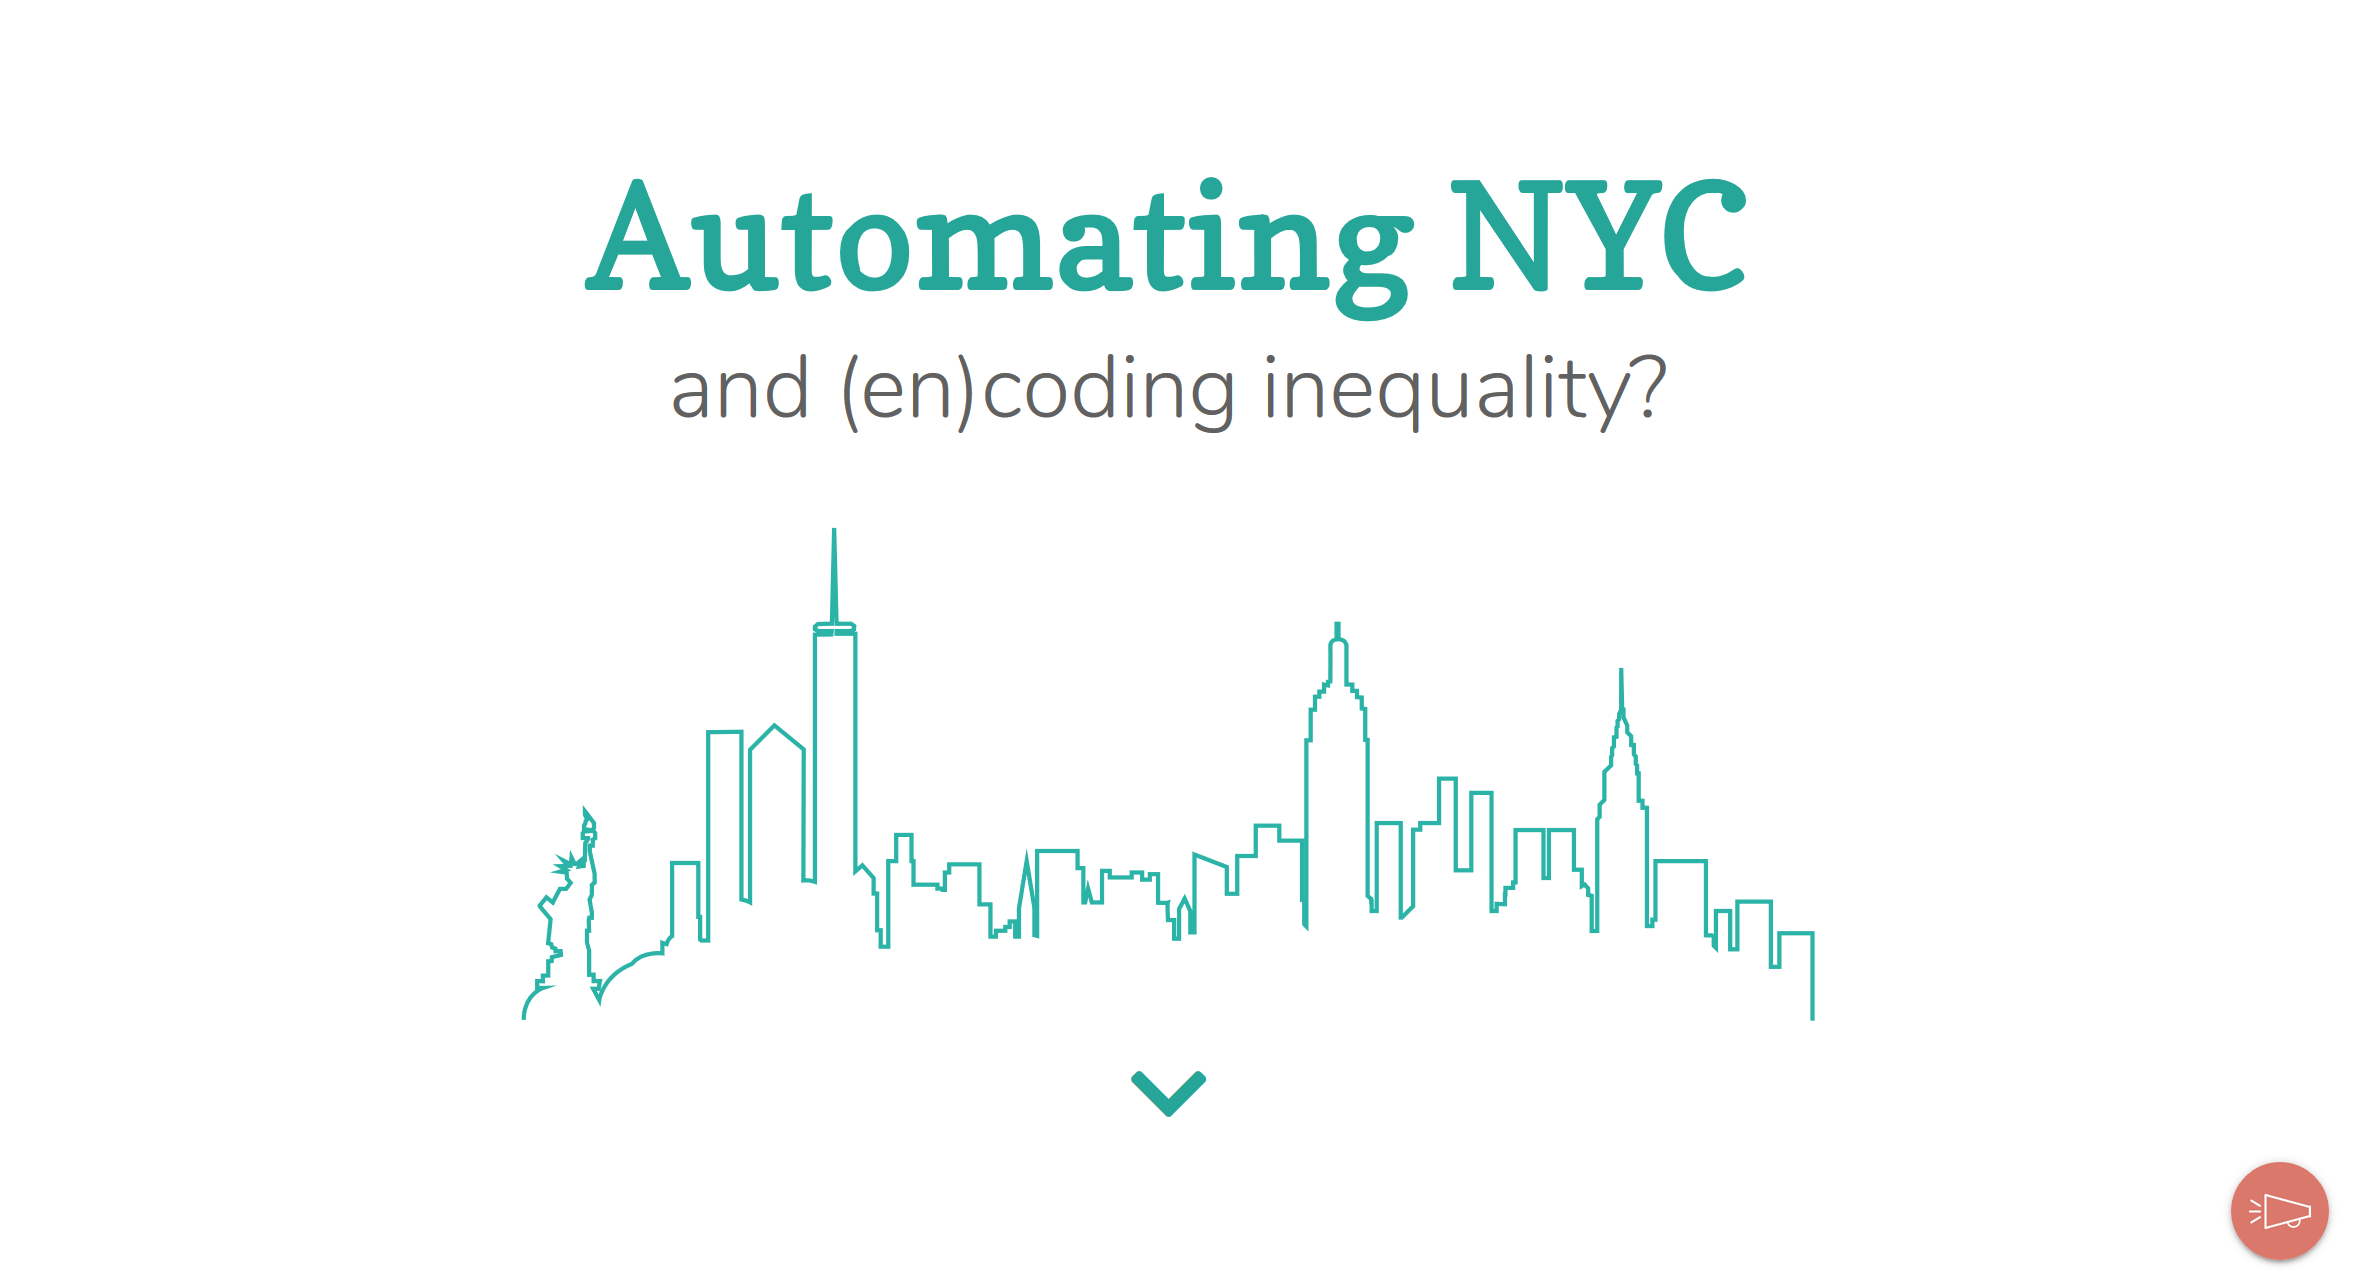 a screenshot of the skyline of New York City with text that says 'Automating NYC and (en)coding inequality?'